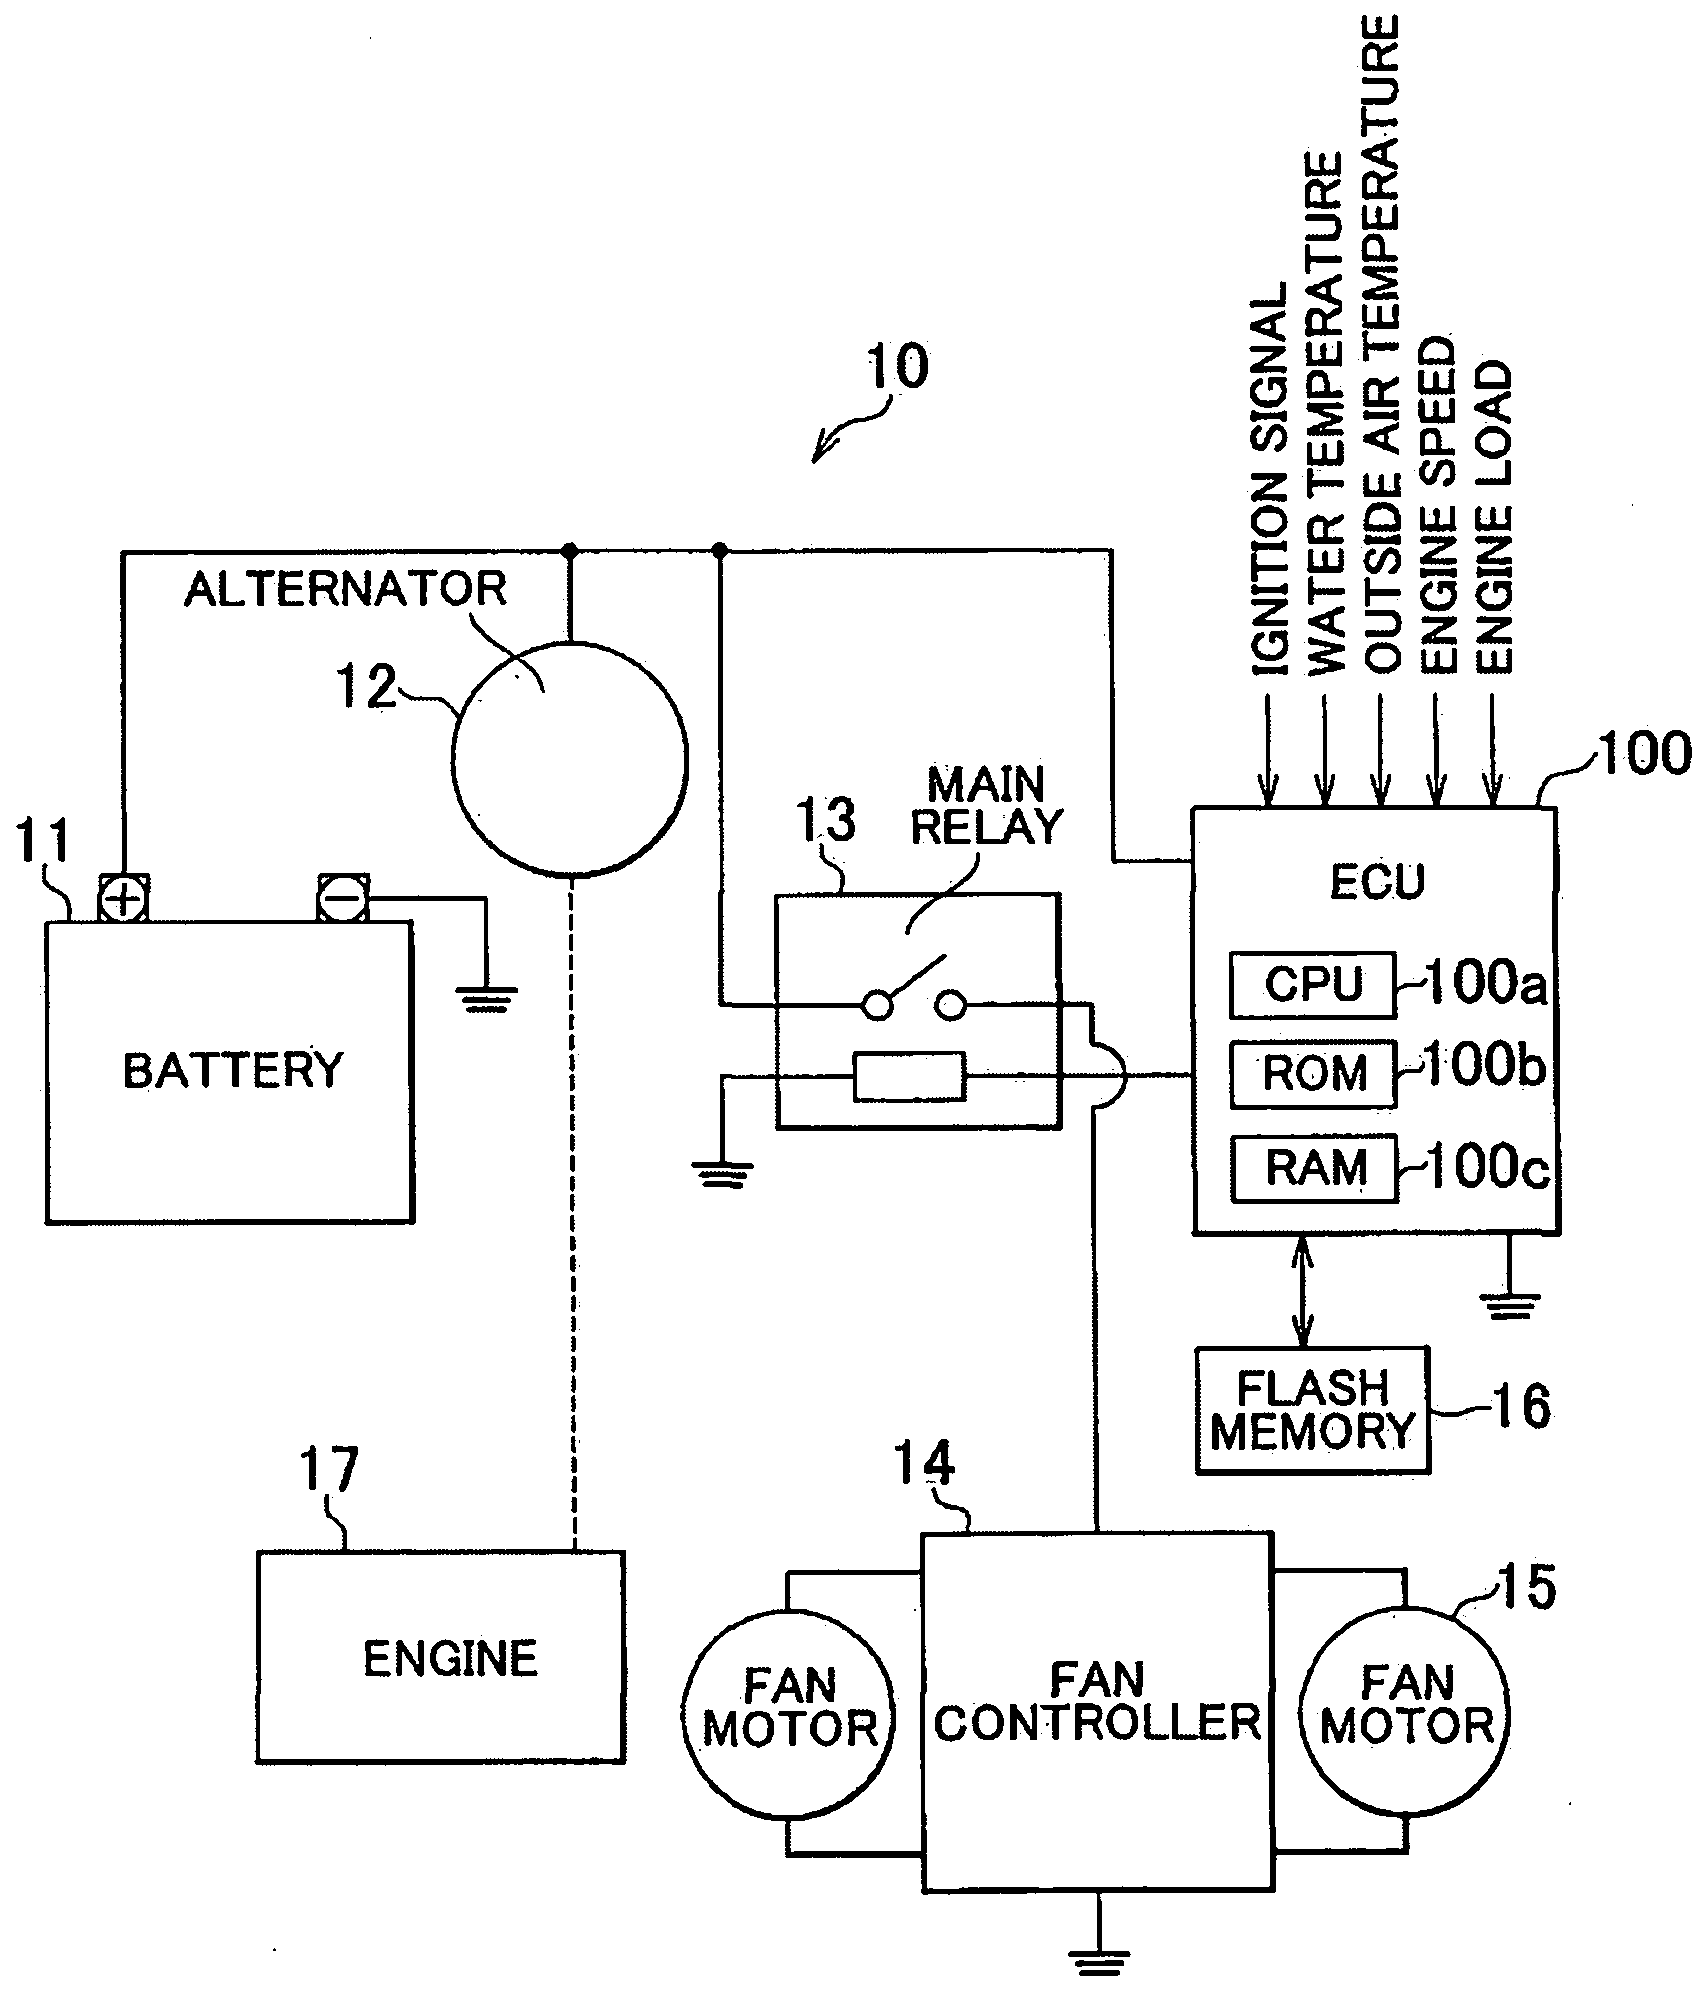 Fan operation control method and apparatus